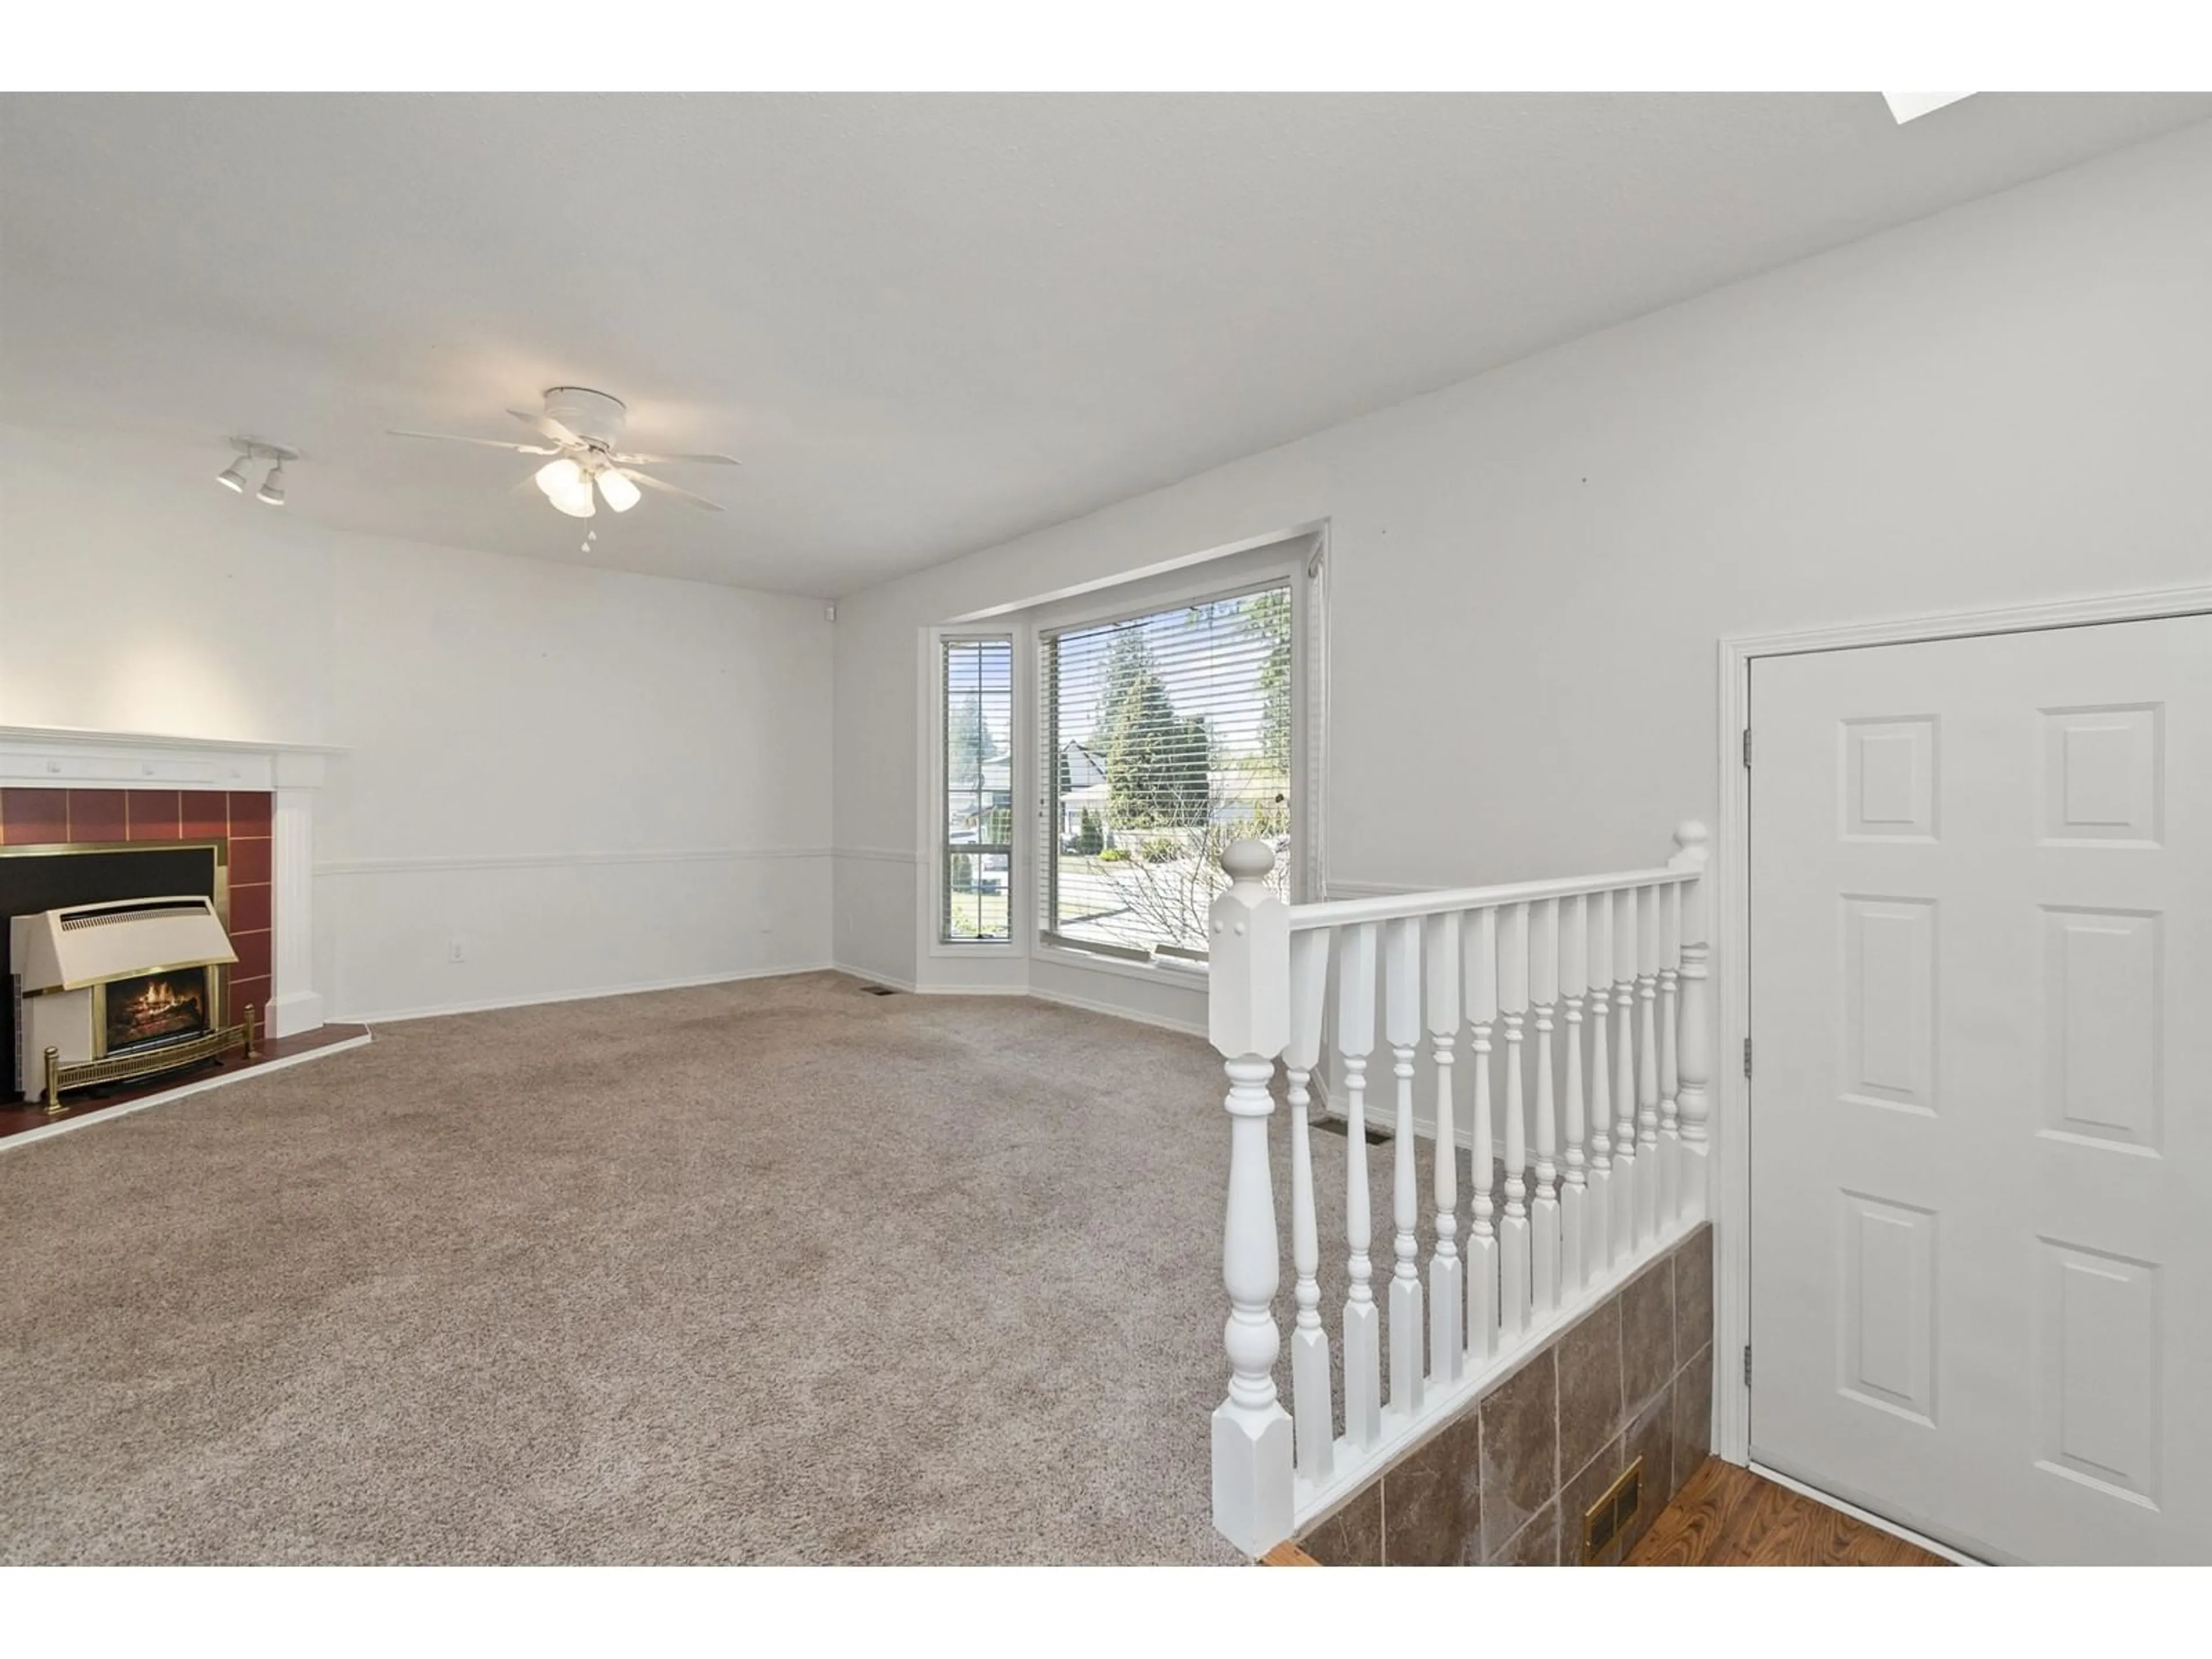 Indoor foyer for 34948 MT BLANCHARD DRIVE, Abbotsford British Columbia V2S6N5